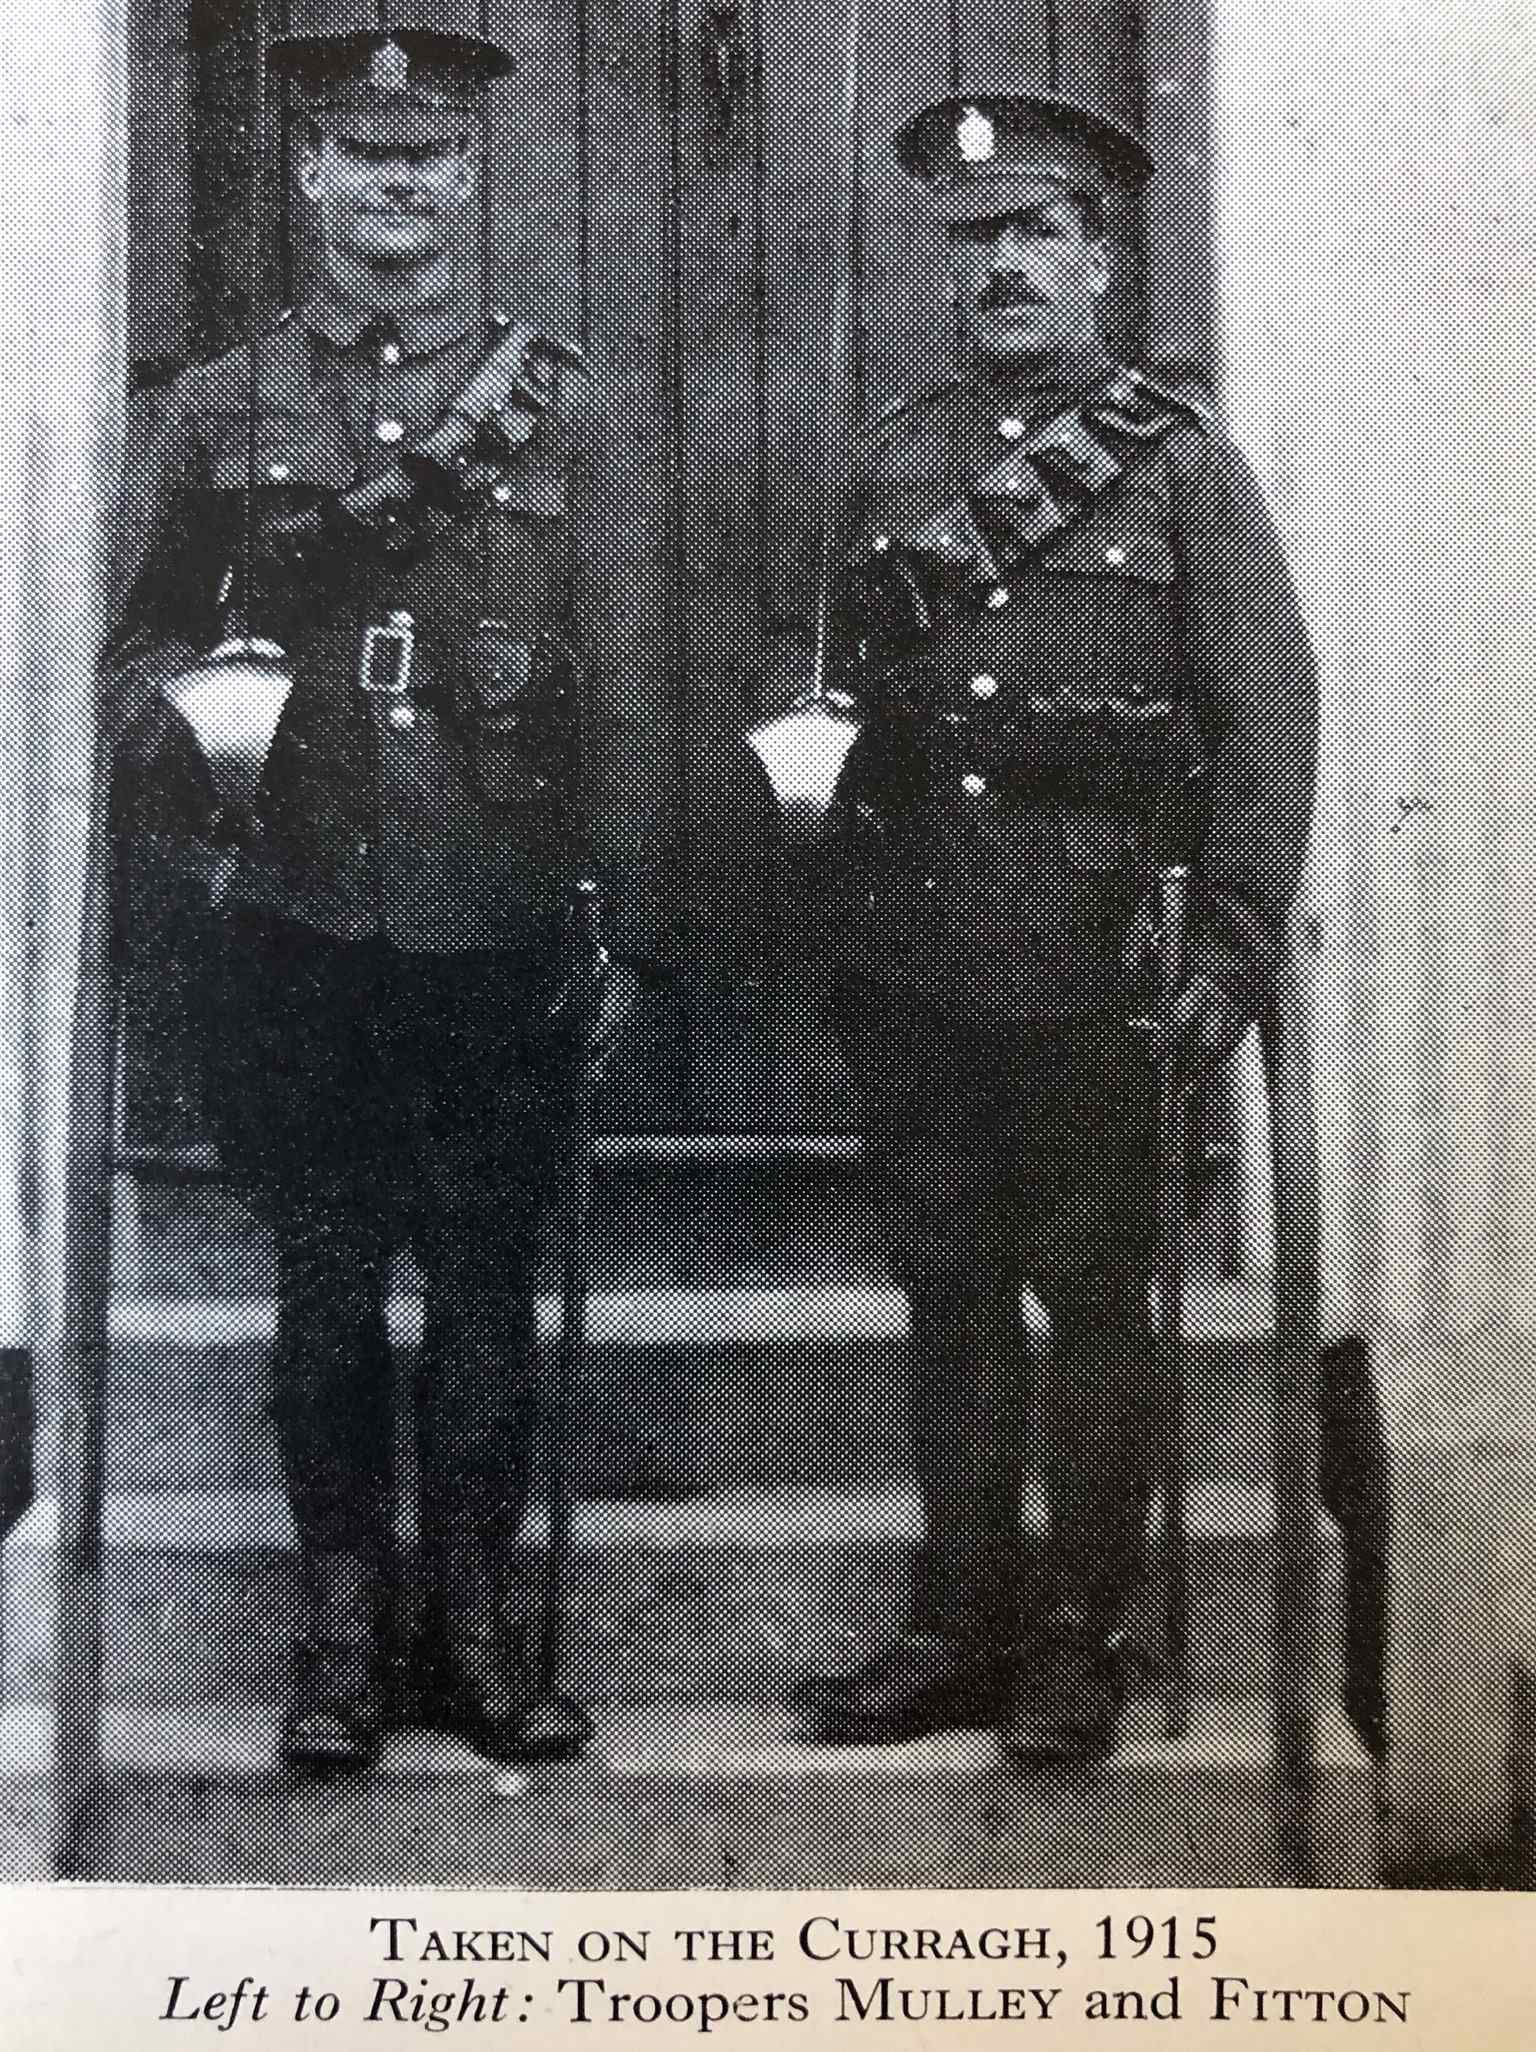 FITTON, John. 1098. Private. 'B' Squadron 1916. (On right). Noting that they are wearing 1903 pattern waist belts.